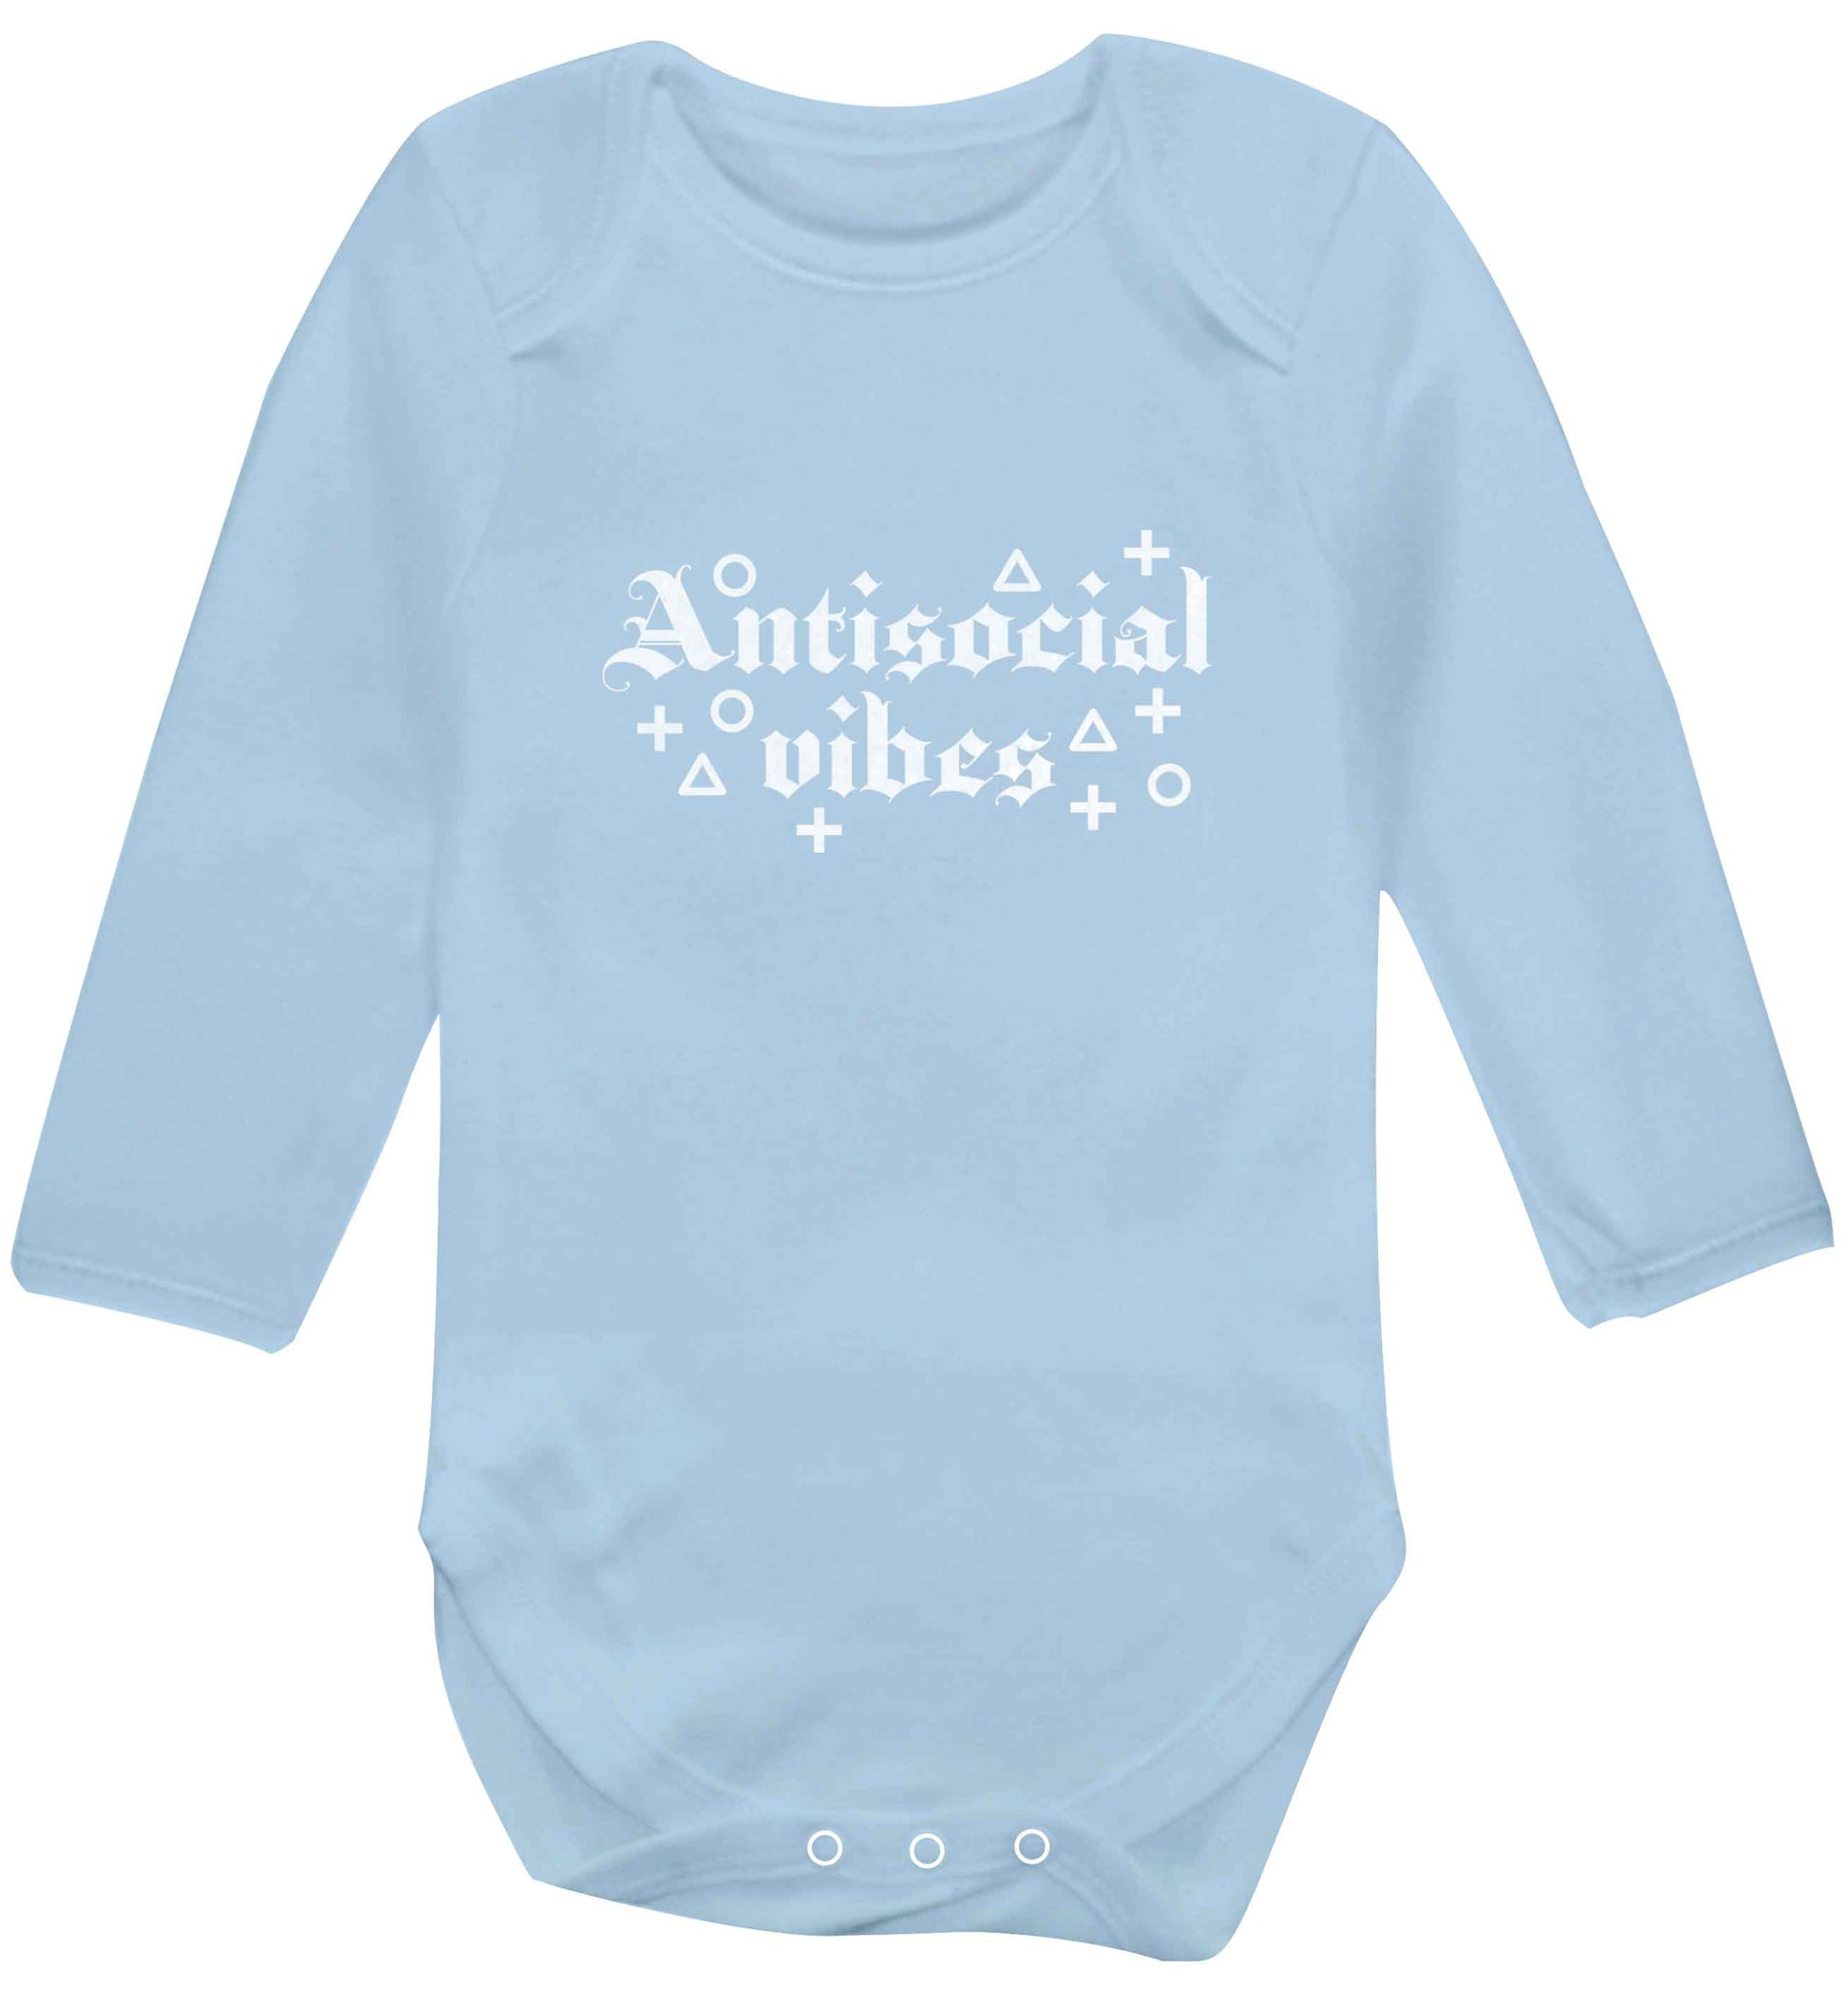 Antisocial vibes baby vest long sleeved pale blue 6-12 months